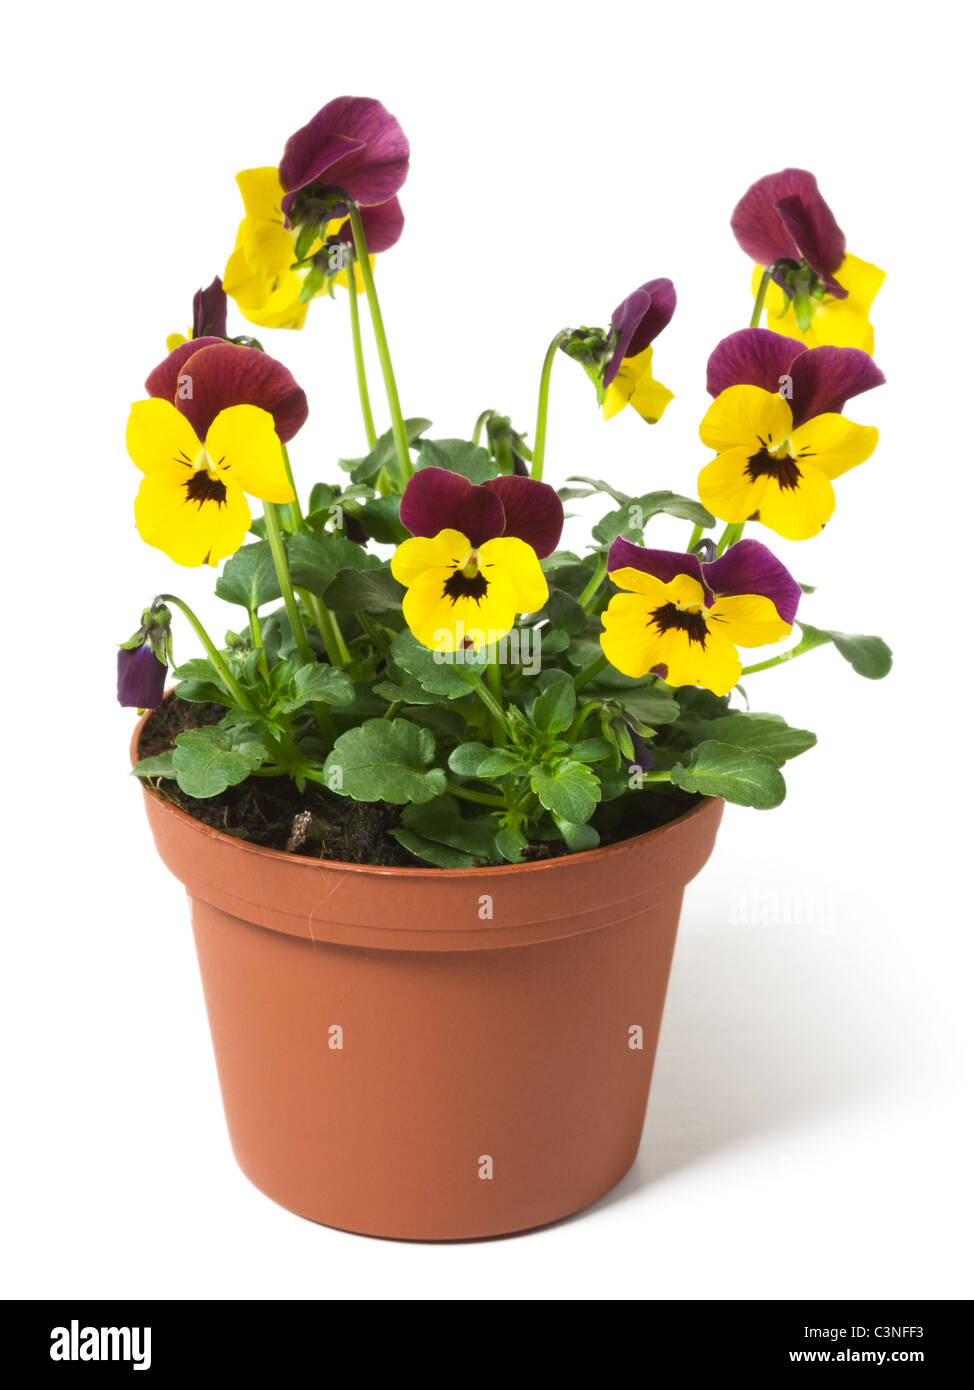 Flower pot with pansies on white background Stock Photo